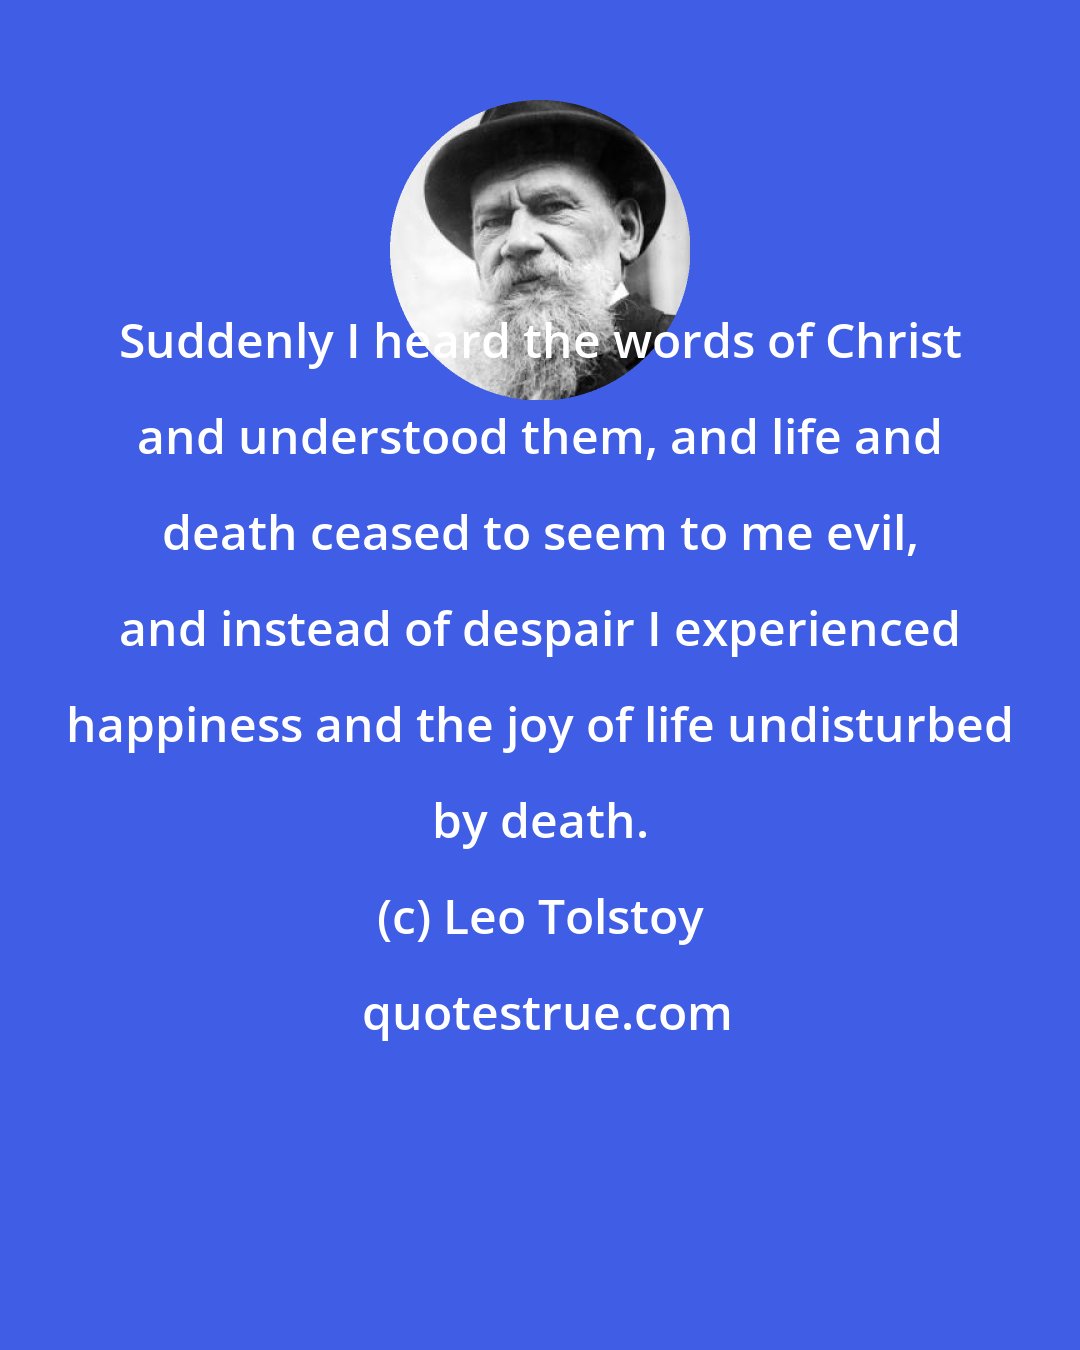 Leo Tolstoy: Suddenly I heard the words of Christ and understood them, and life and death ceased to seem to me evil, and instead of despair I experienced happiness and the joy of life undisturbed by death.